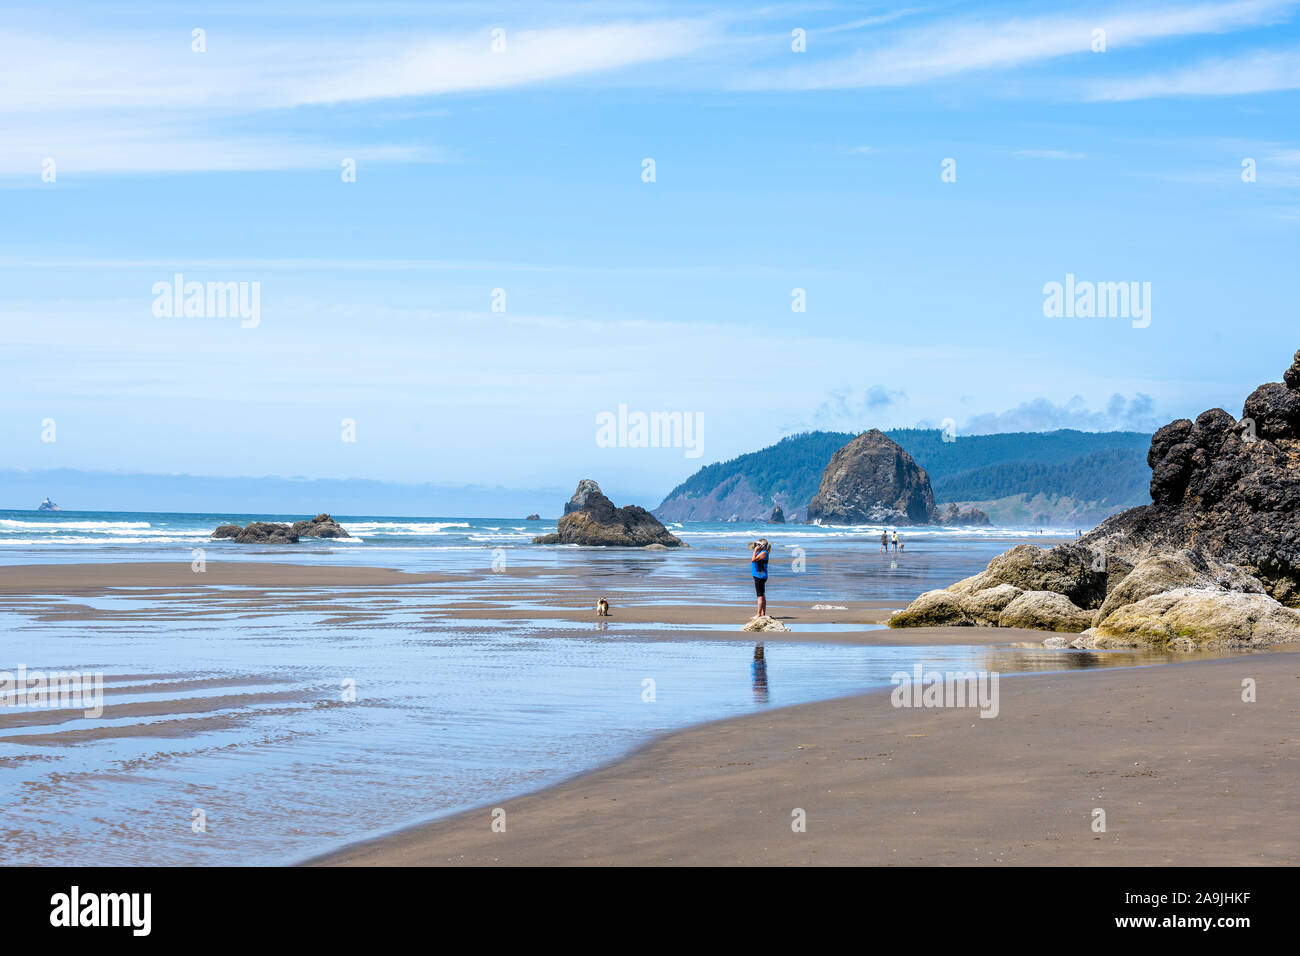 Woman with a dog and other people are walking on the waterline in the Northwest of the Pacific ocean coast with fancy rocks sticking out of the water Stock Photo